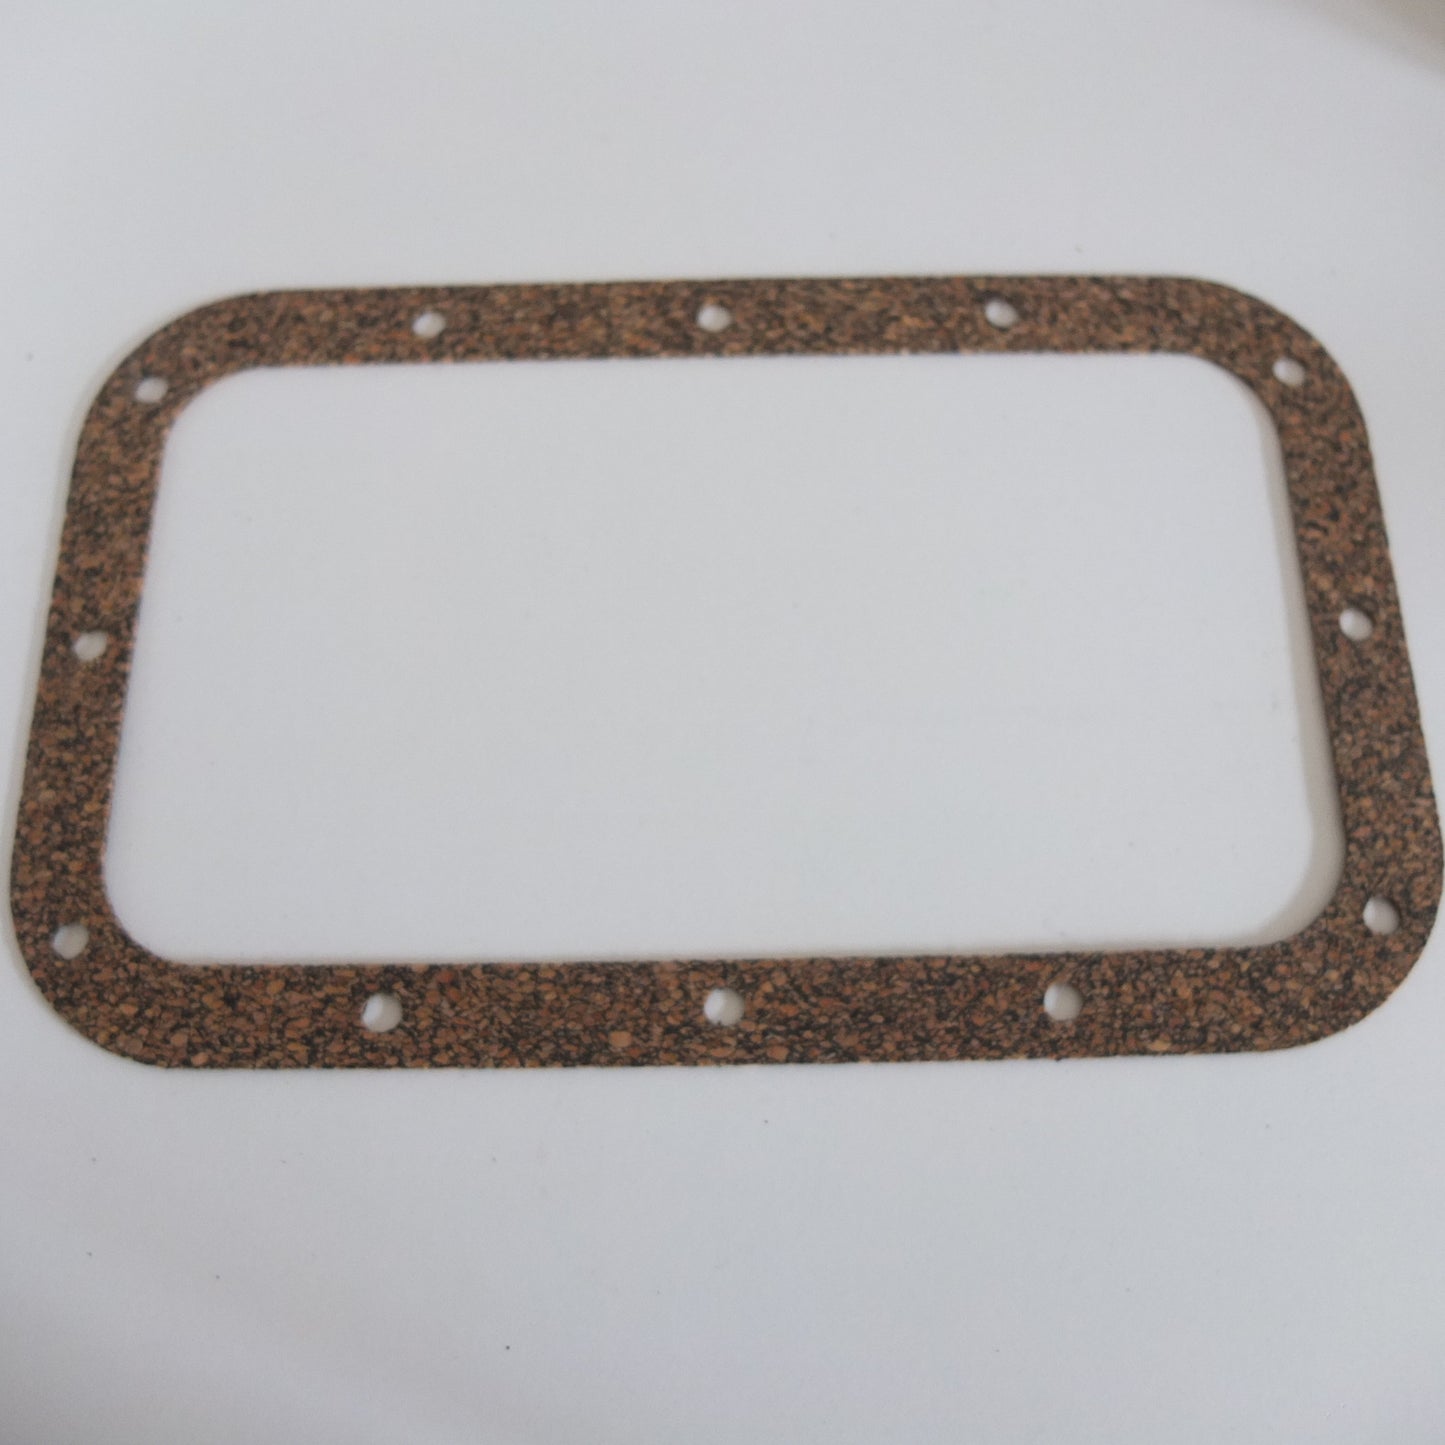 P13/191 Early S7 Sump gasket (cork)